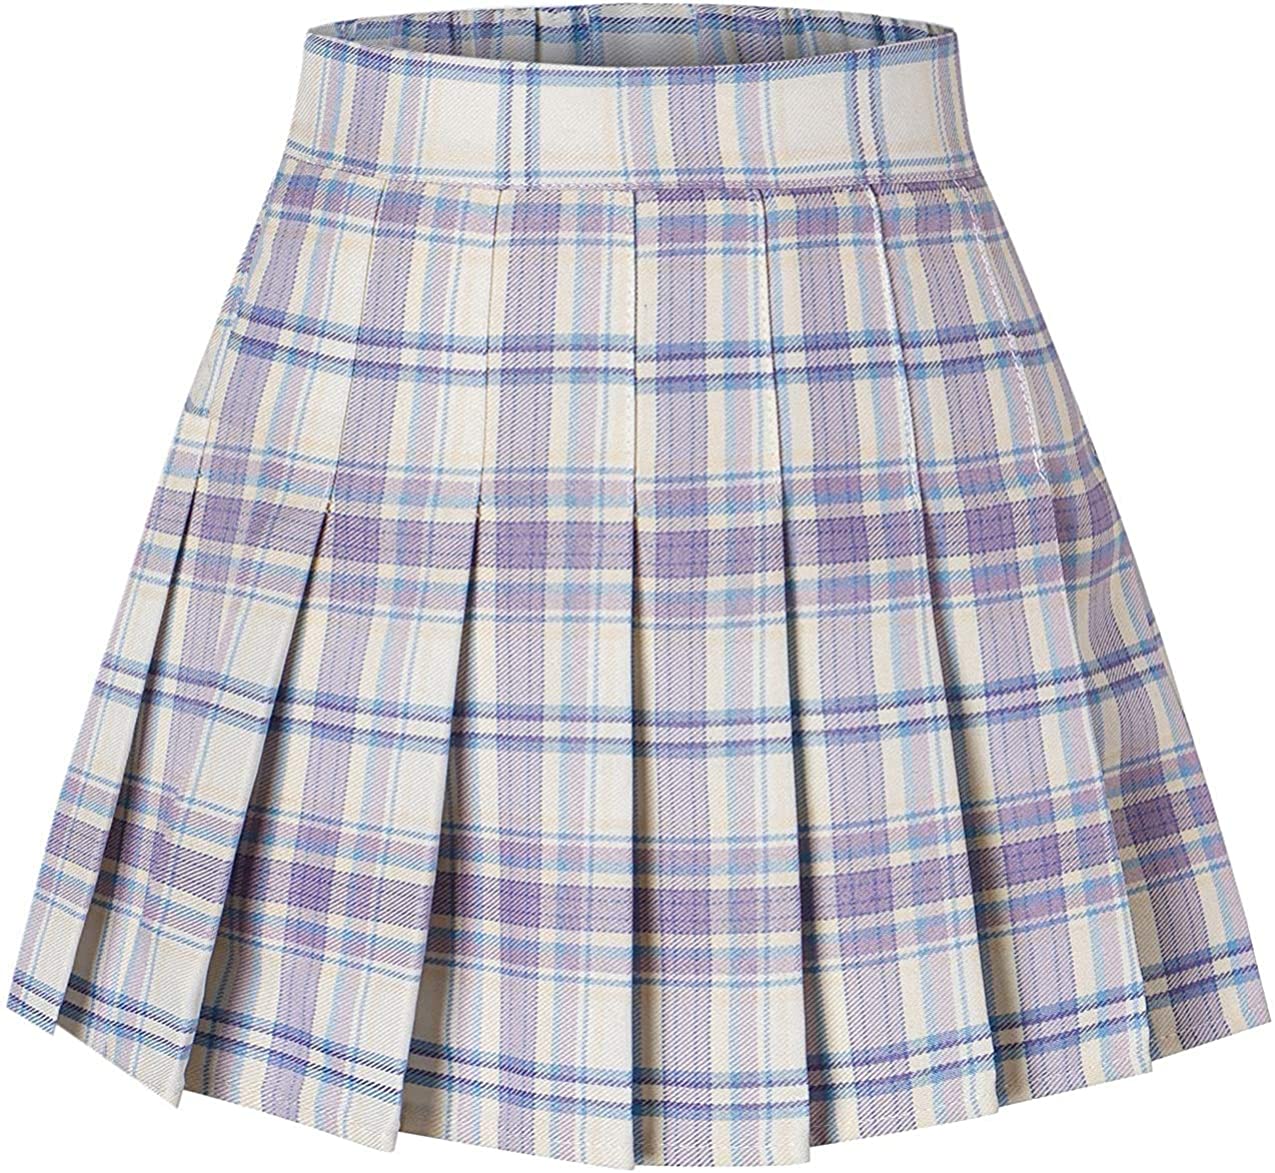 2 Years US 3XL SANGTREE Girls Women's Pleated Skirt with Comfy Stretchy Band